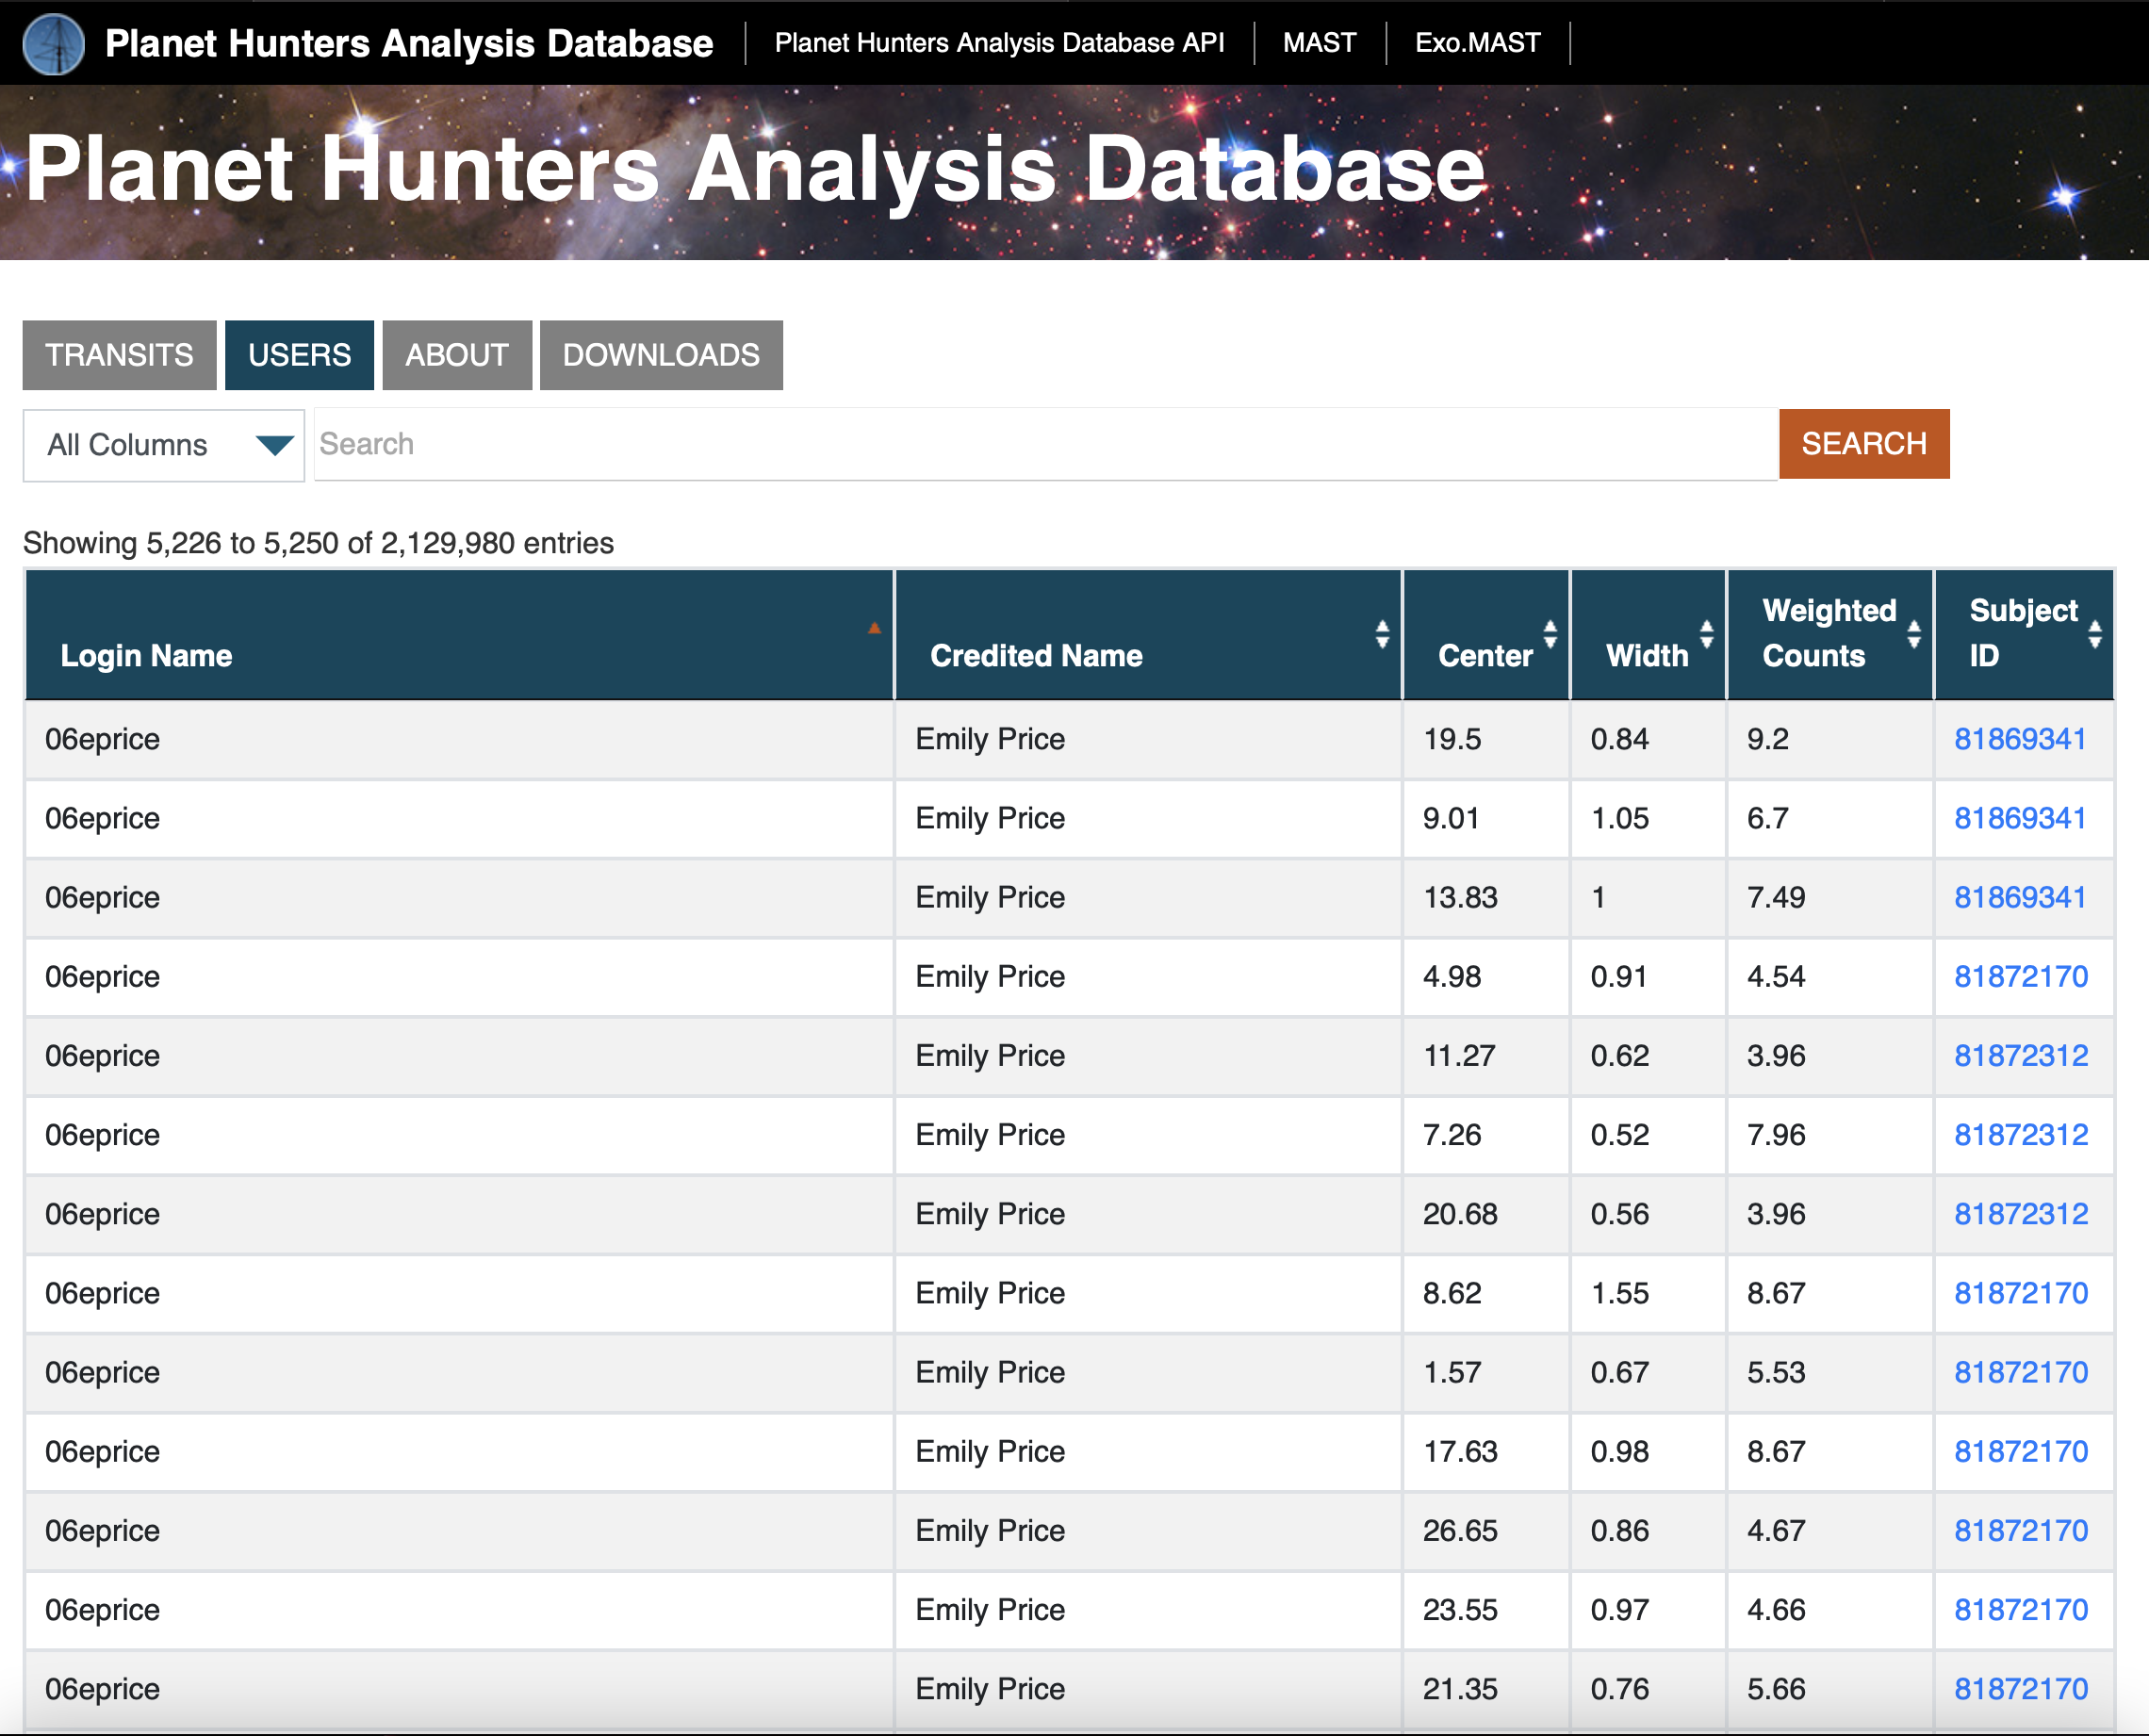 Screenshot showing the Users tab: a sortable table of classifications per user.